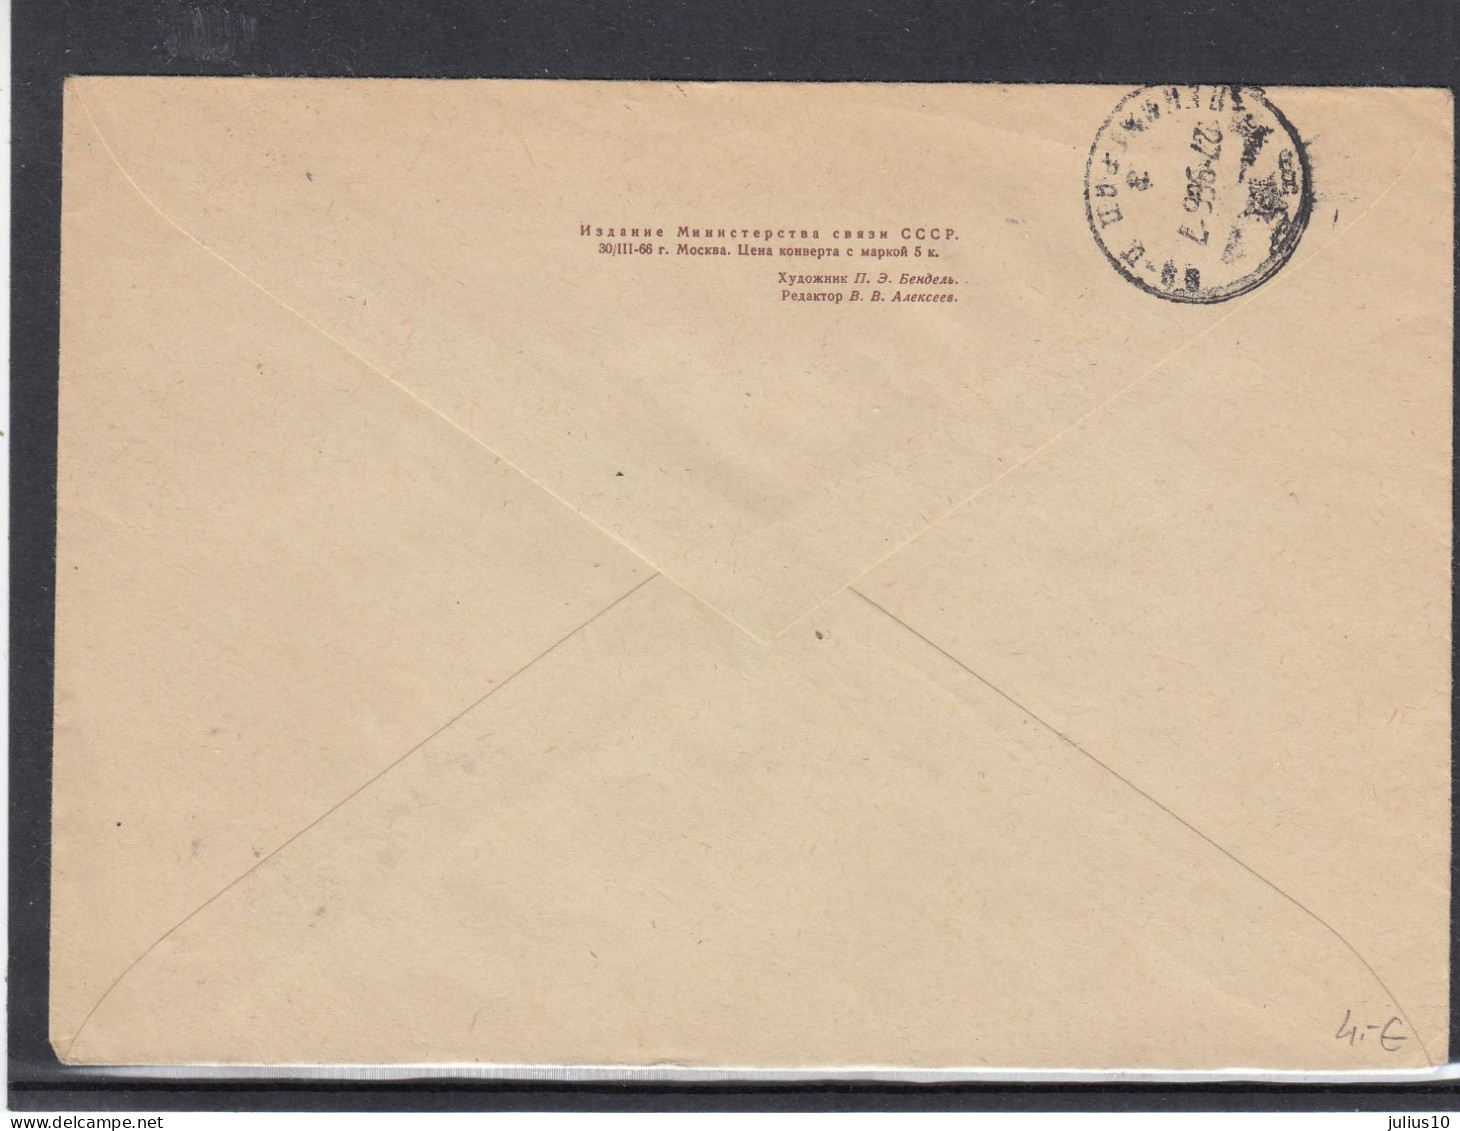 LITHUANIA (USSR) 1966 Cover Poet J.Janonis #LTV11 - Lithuania